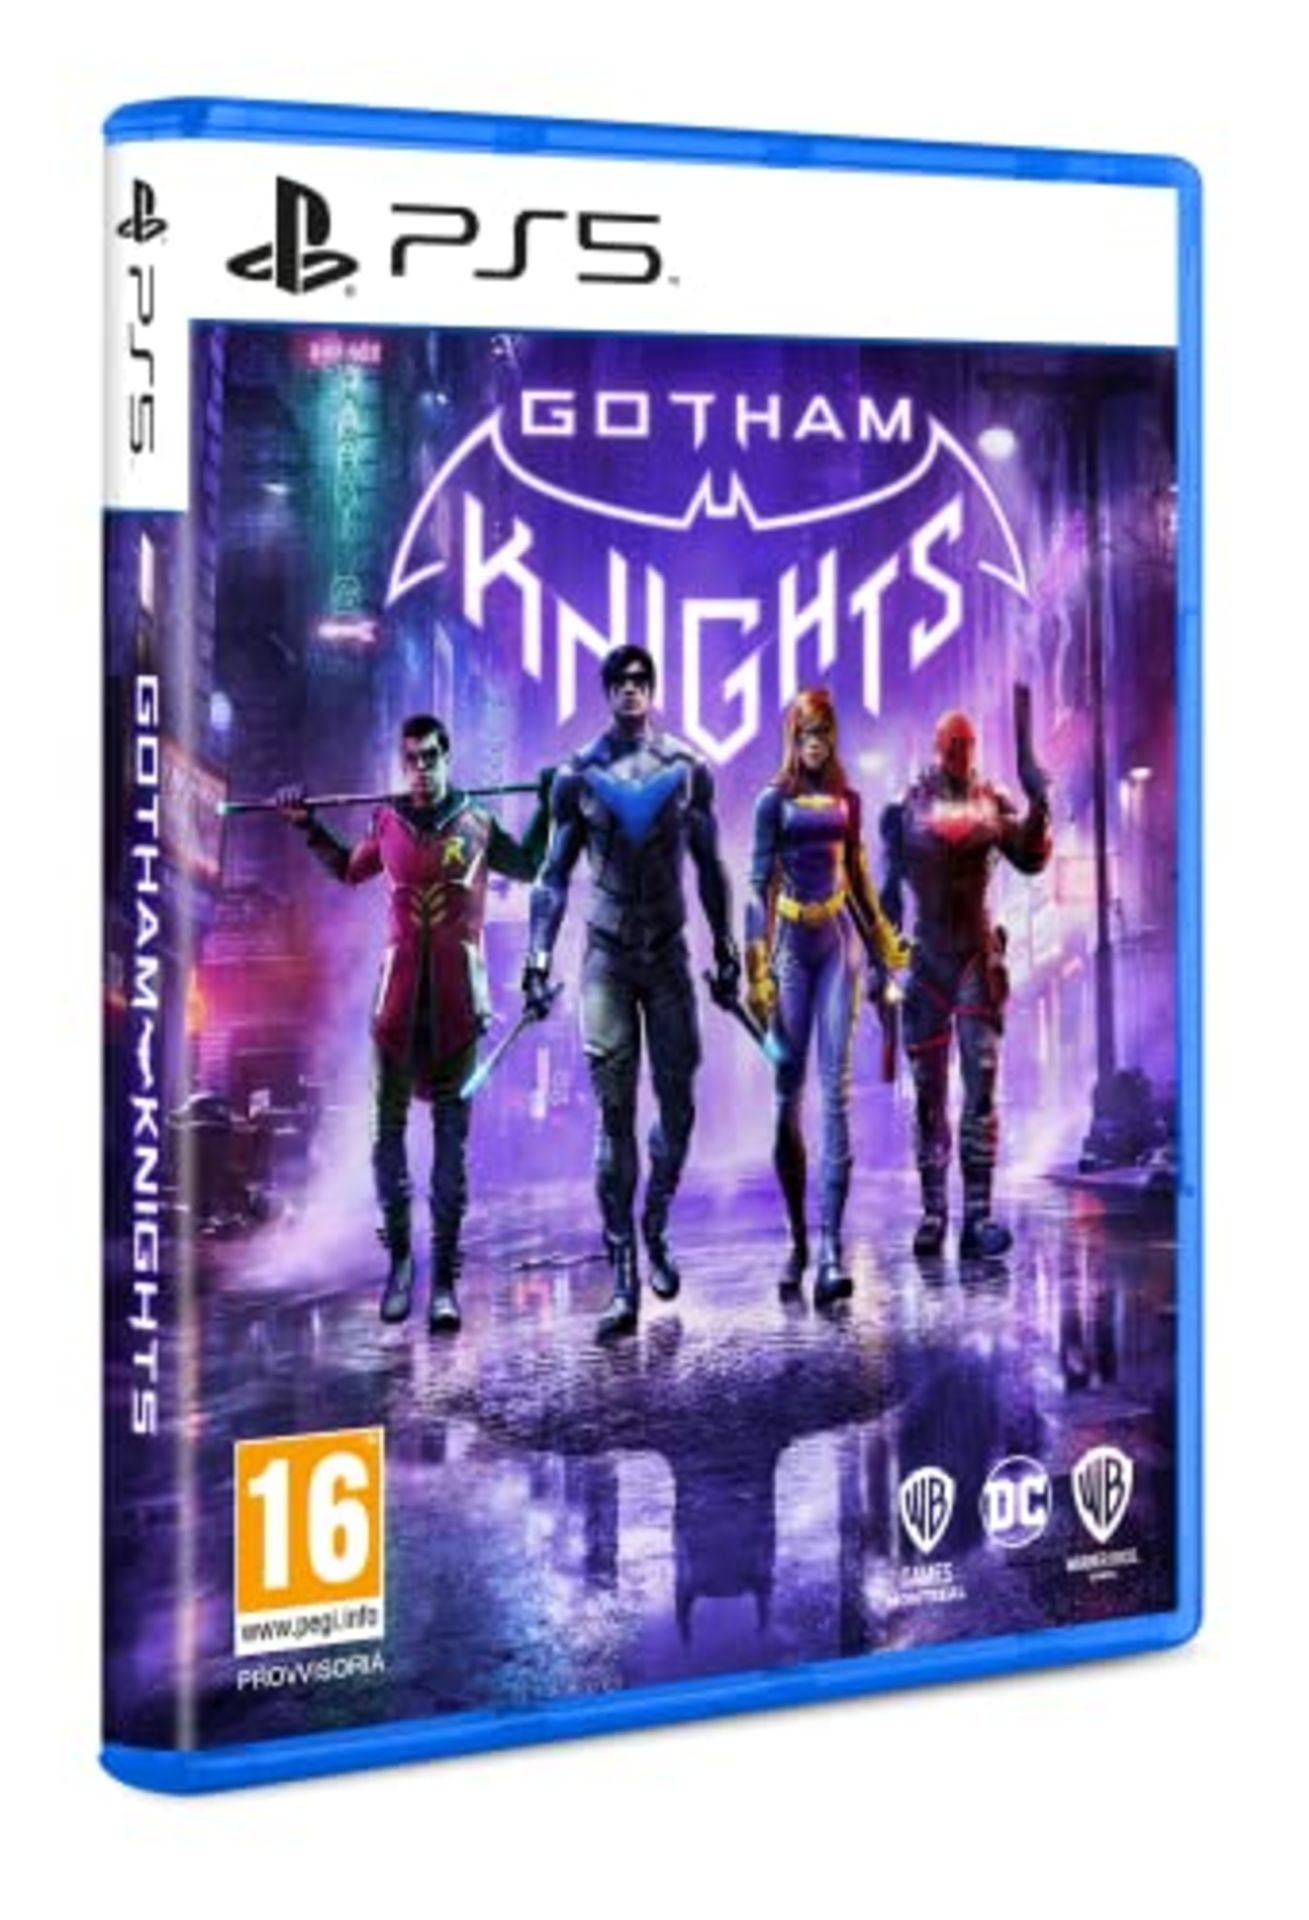 Gotham Knights is a video game available on the PlayStation 5. - Image 4 of 6